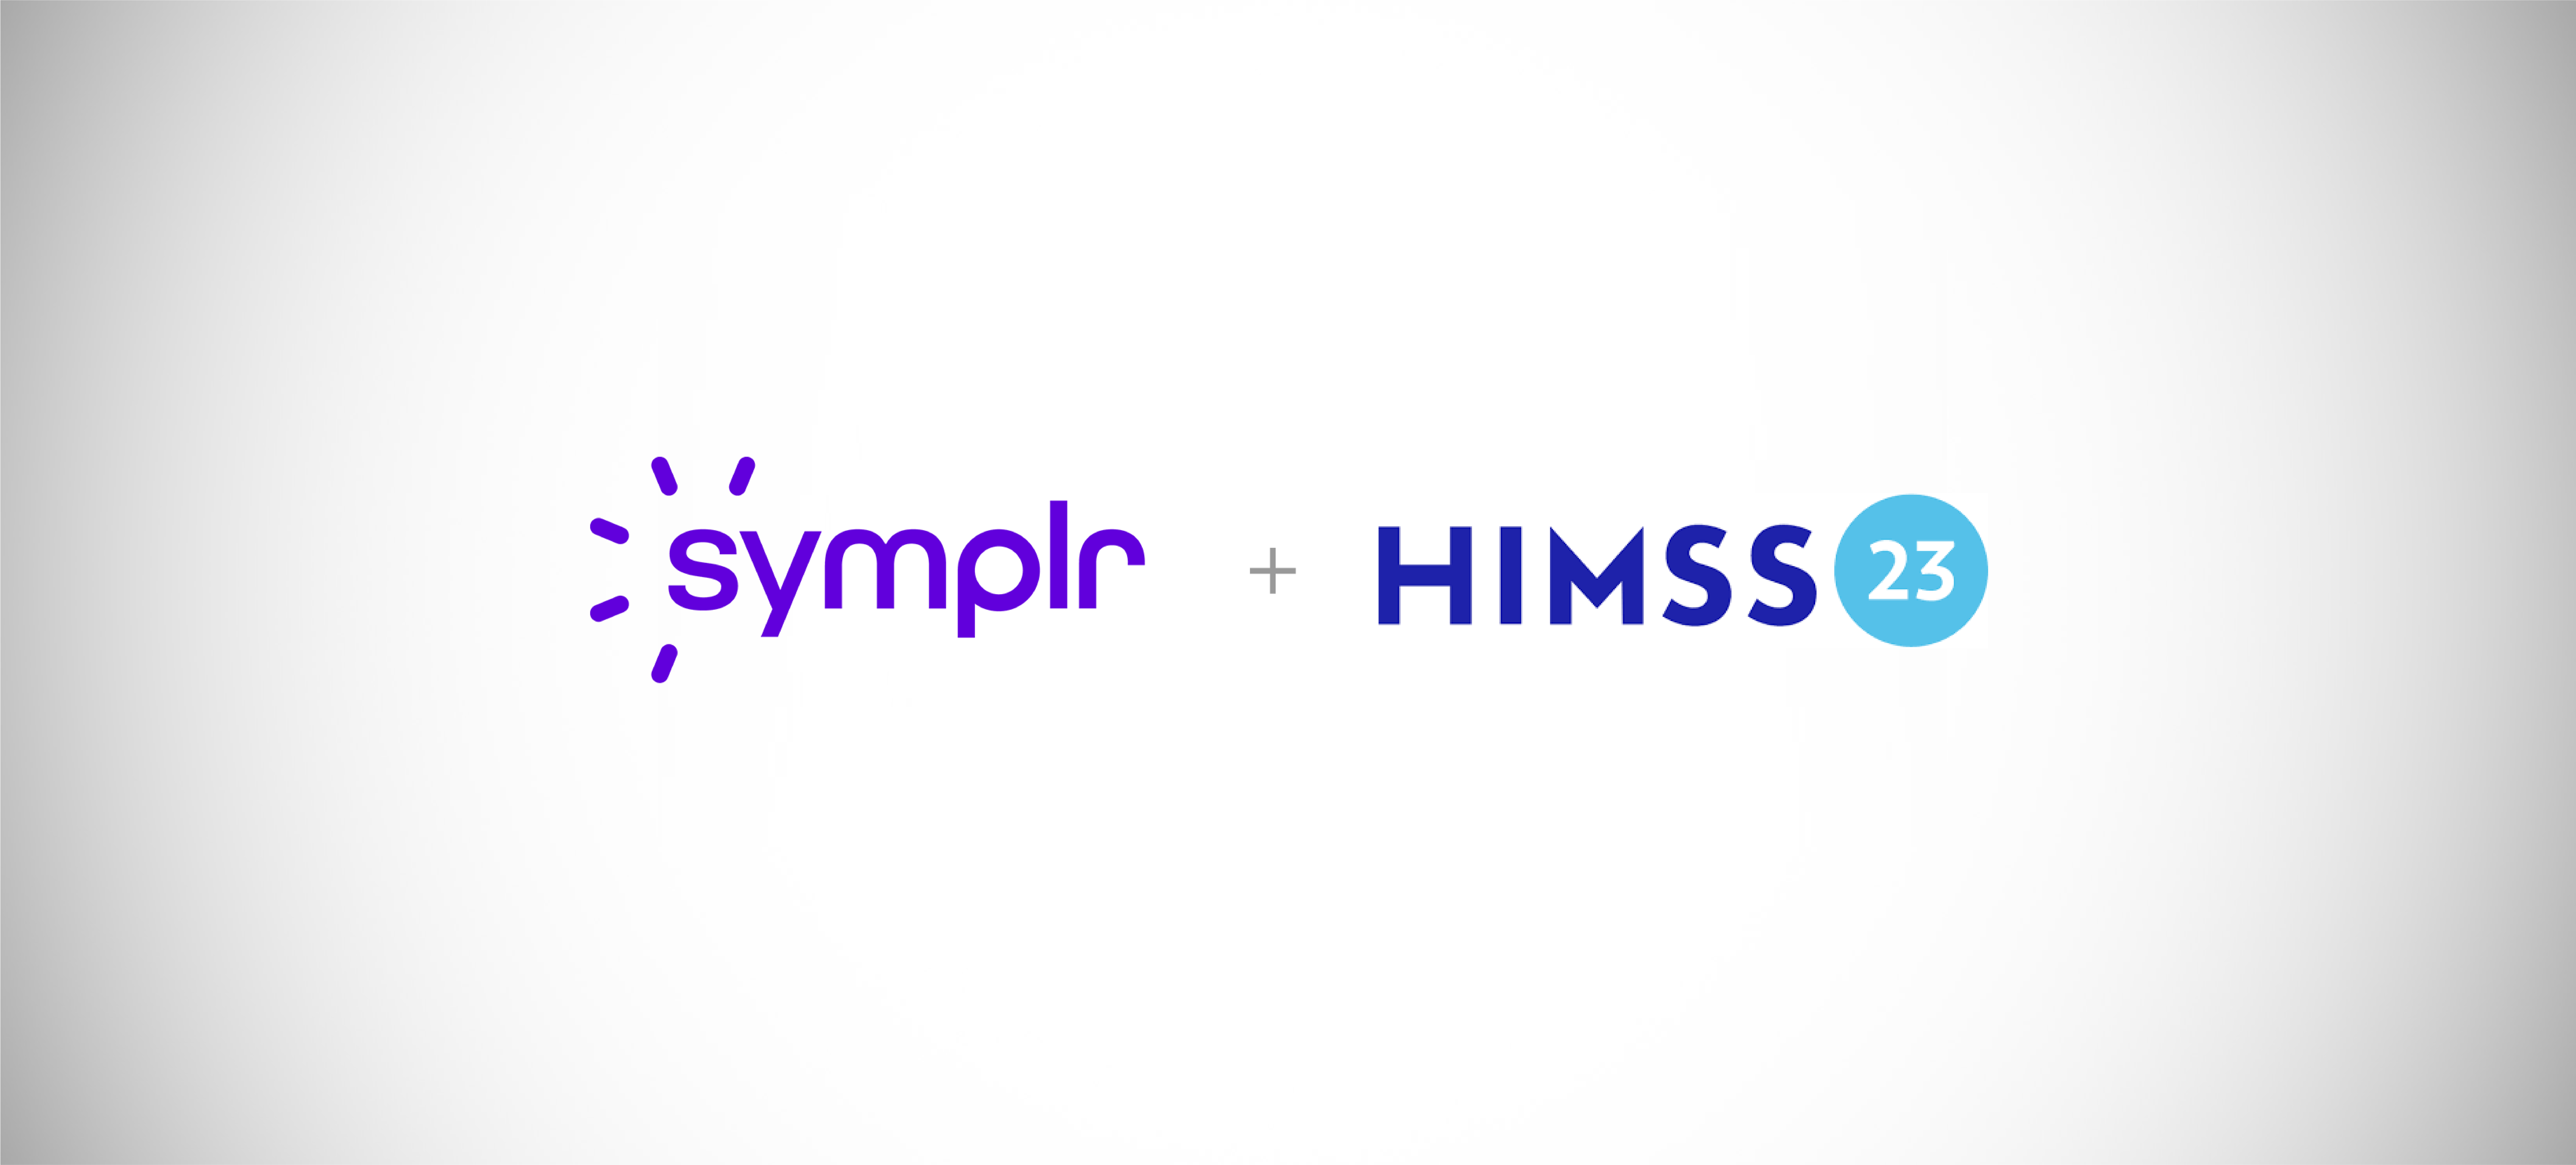 symplr Launches Product Suites at HIMSS23 Supporting Hospitals’ Operational Requirements and Mission-Critical Workflows